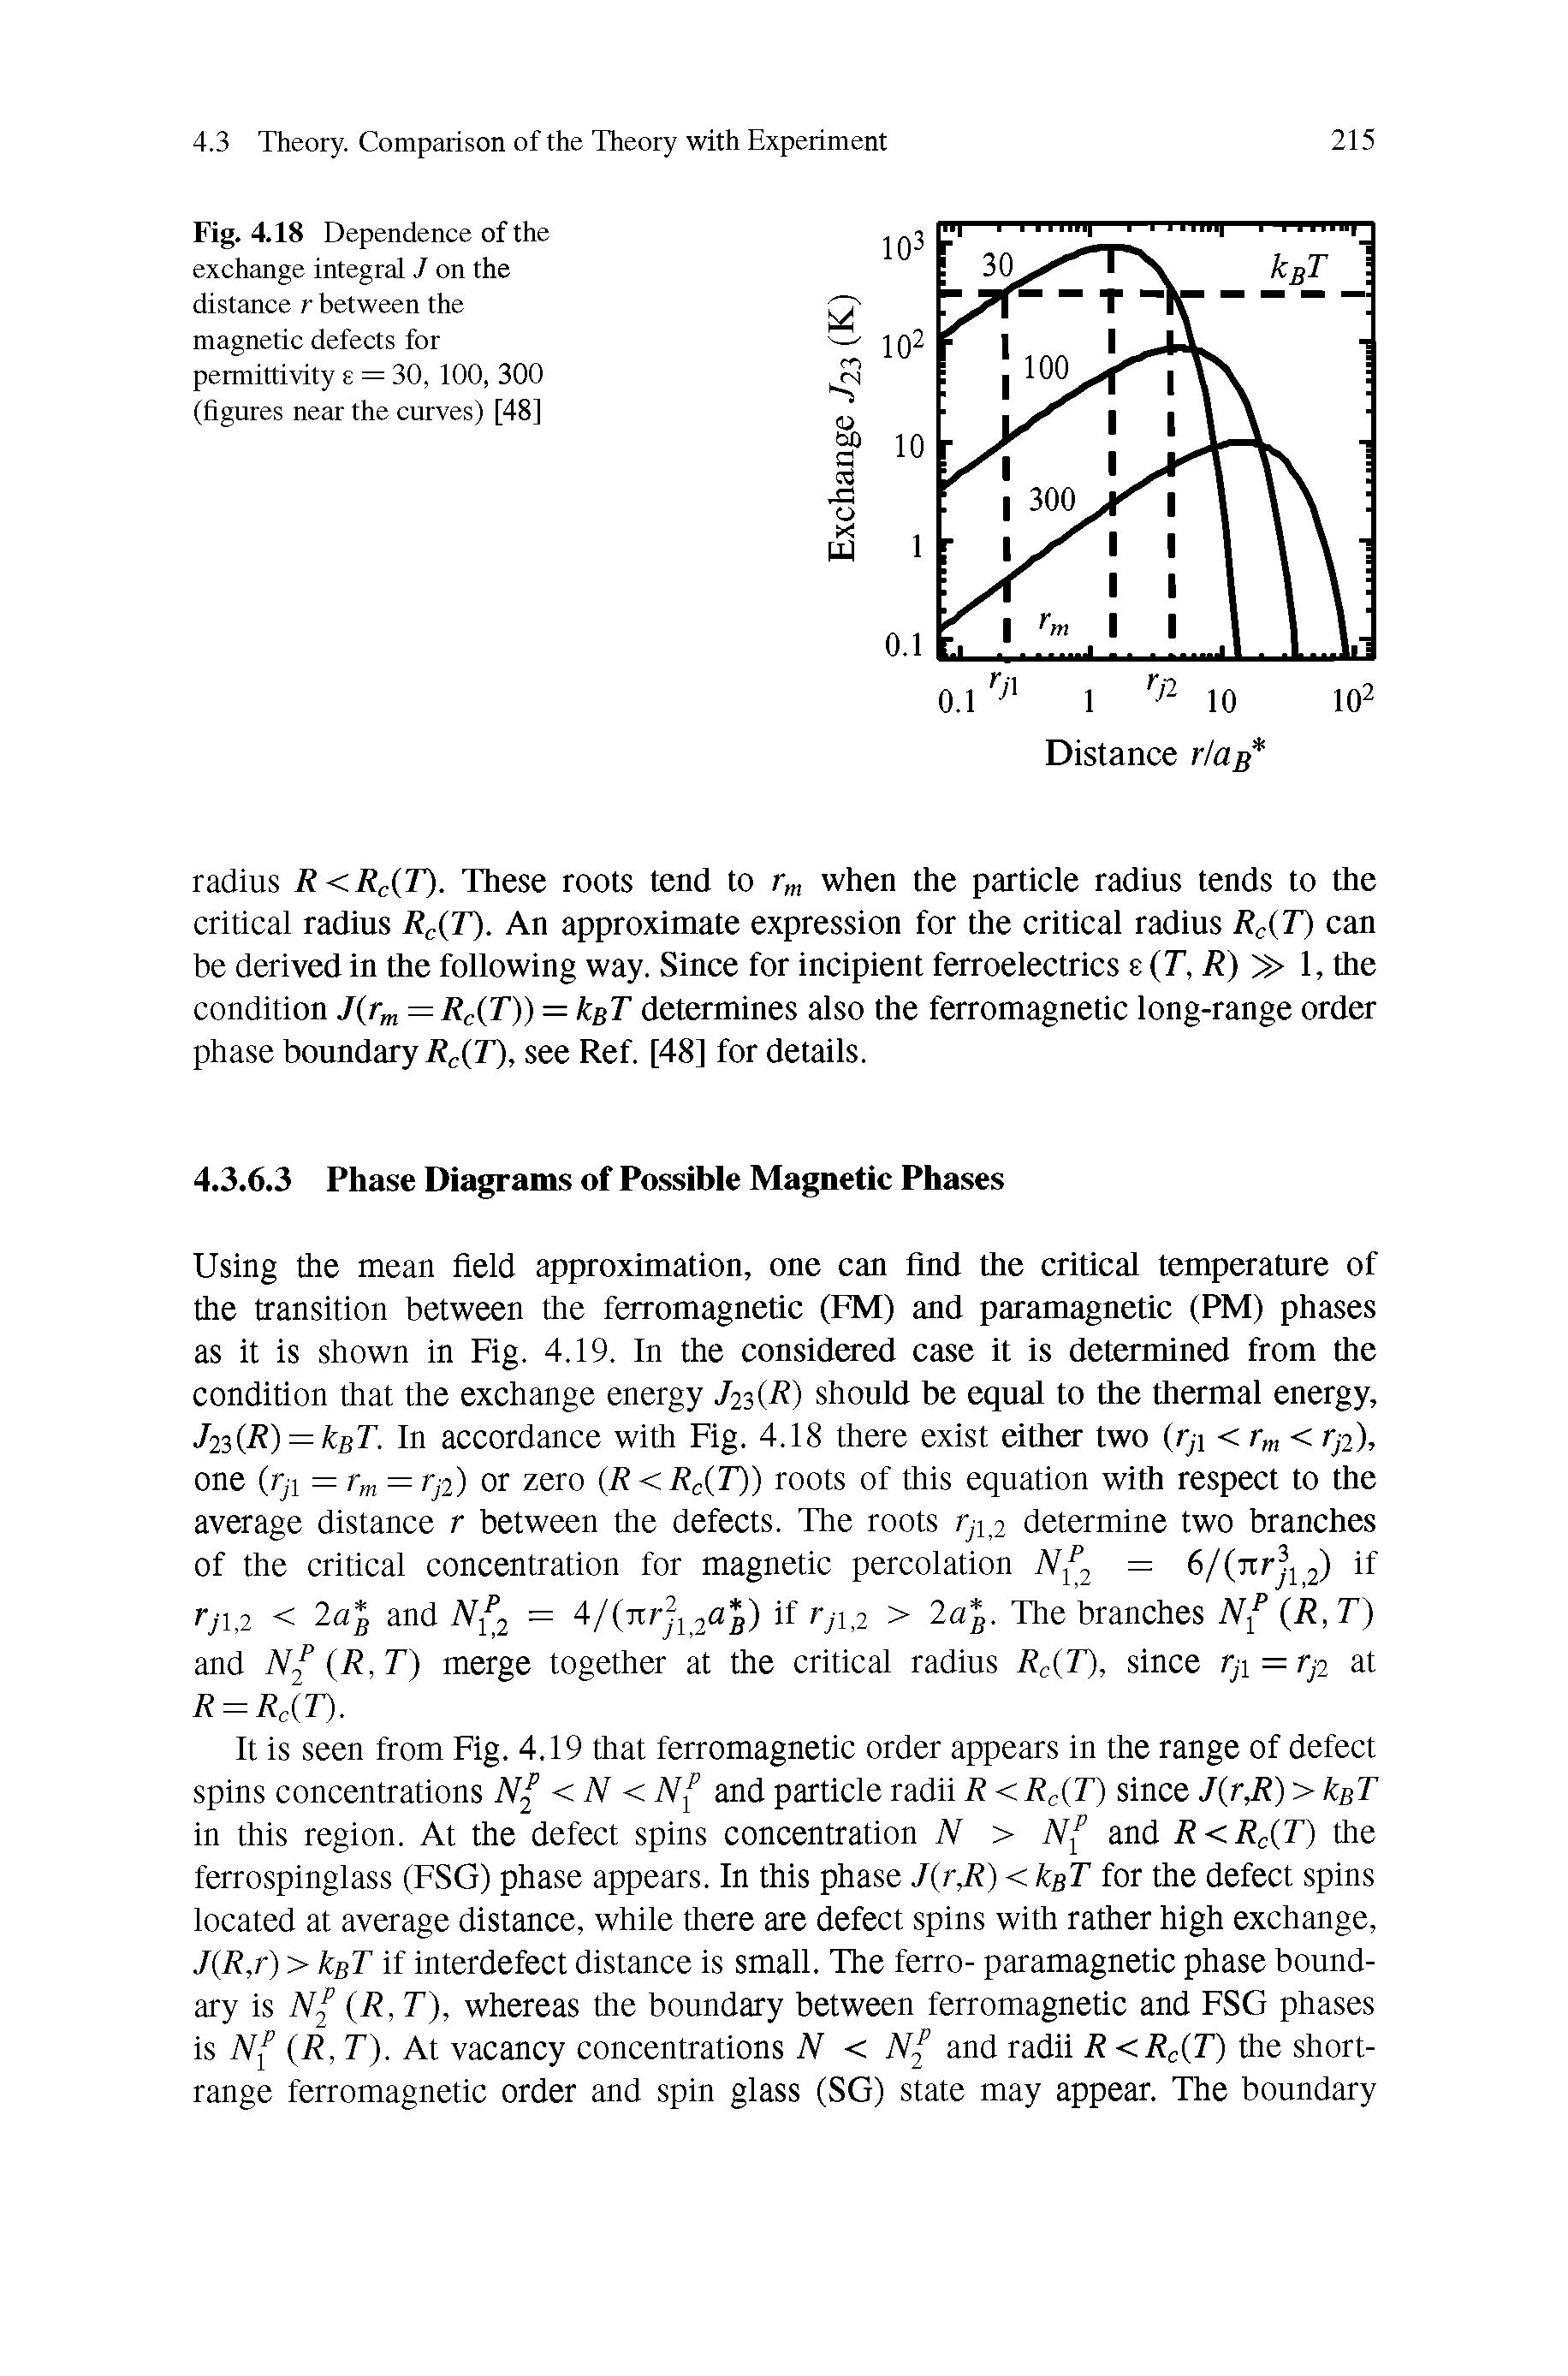 Fig. 4.18 Dependence of the exchange integral J on the distance r between the magnetic defects for permittivity 6 = 30, 100, 300 (figures near the curves) [48]...